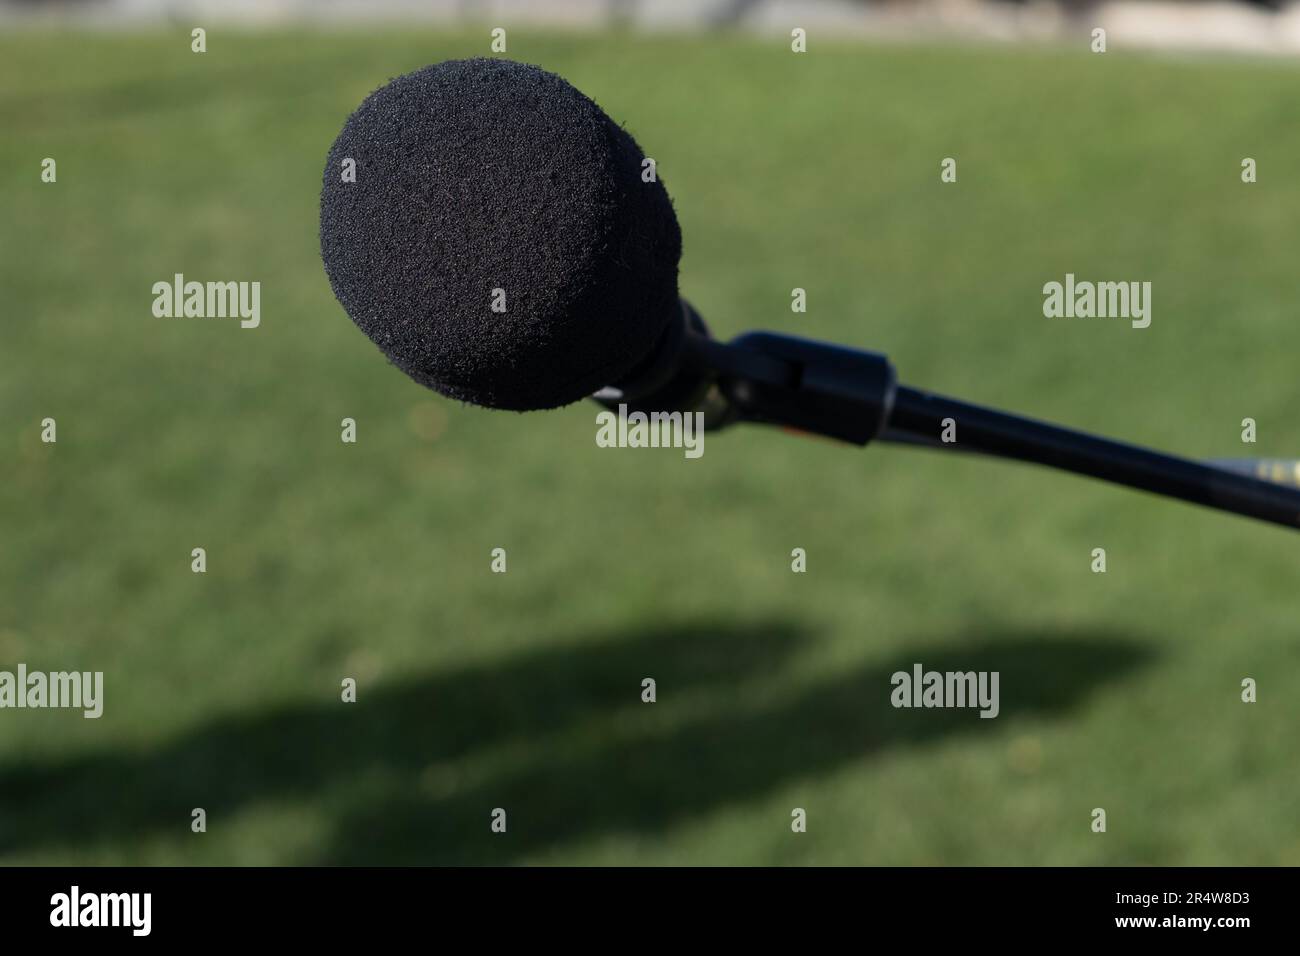 A black metal microphone on a stand. The round ball style mic is a classic for concerts and evening music sessions. The electronic equipment is a mic. Stock Photo